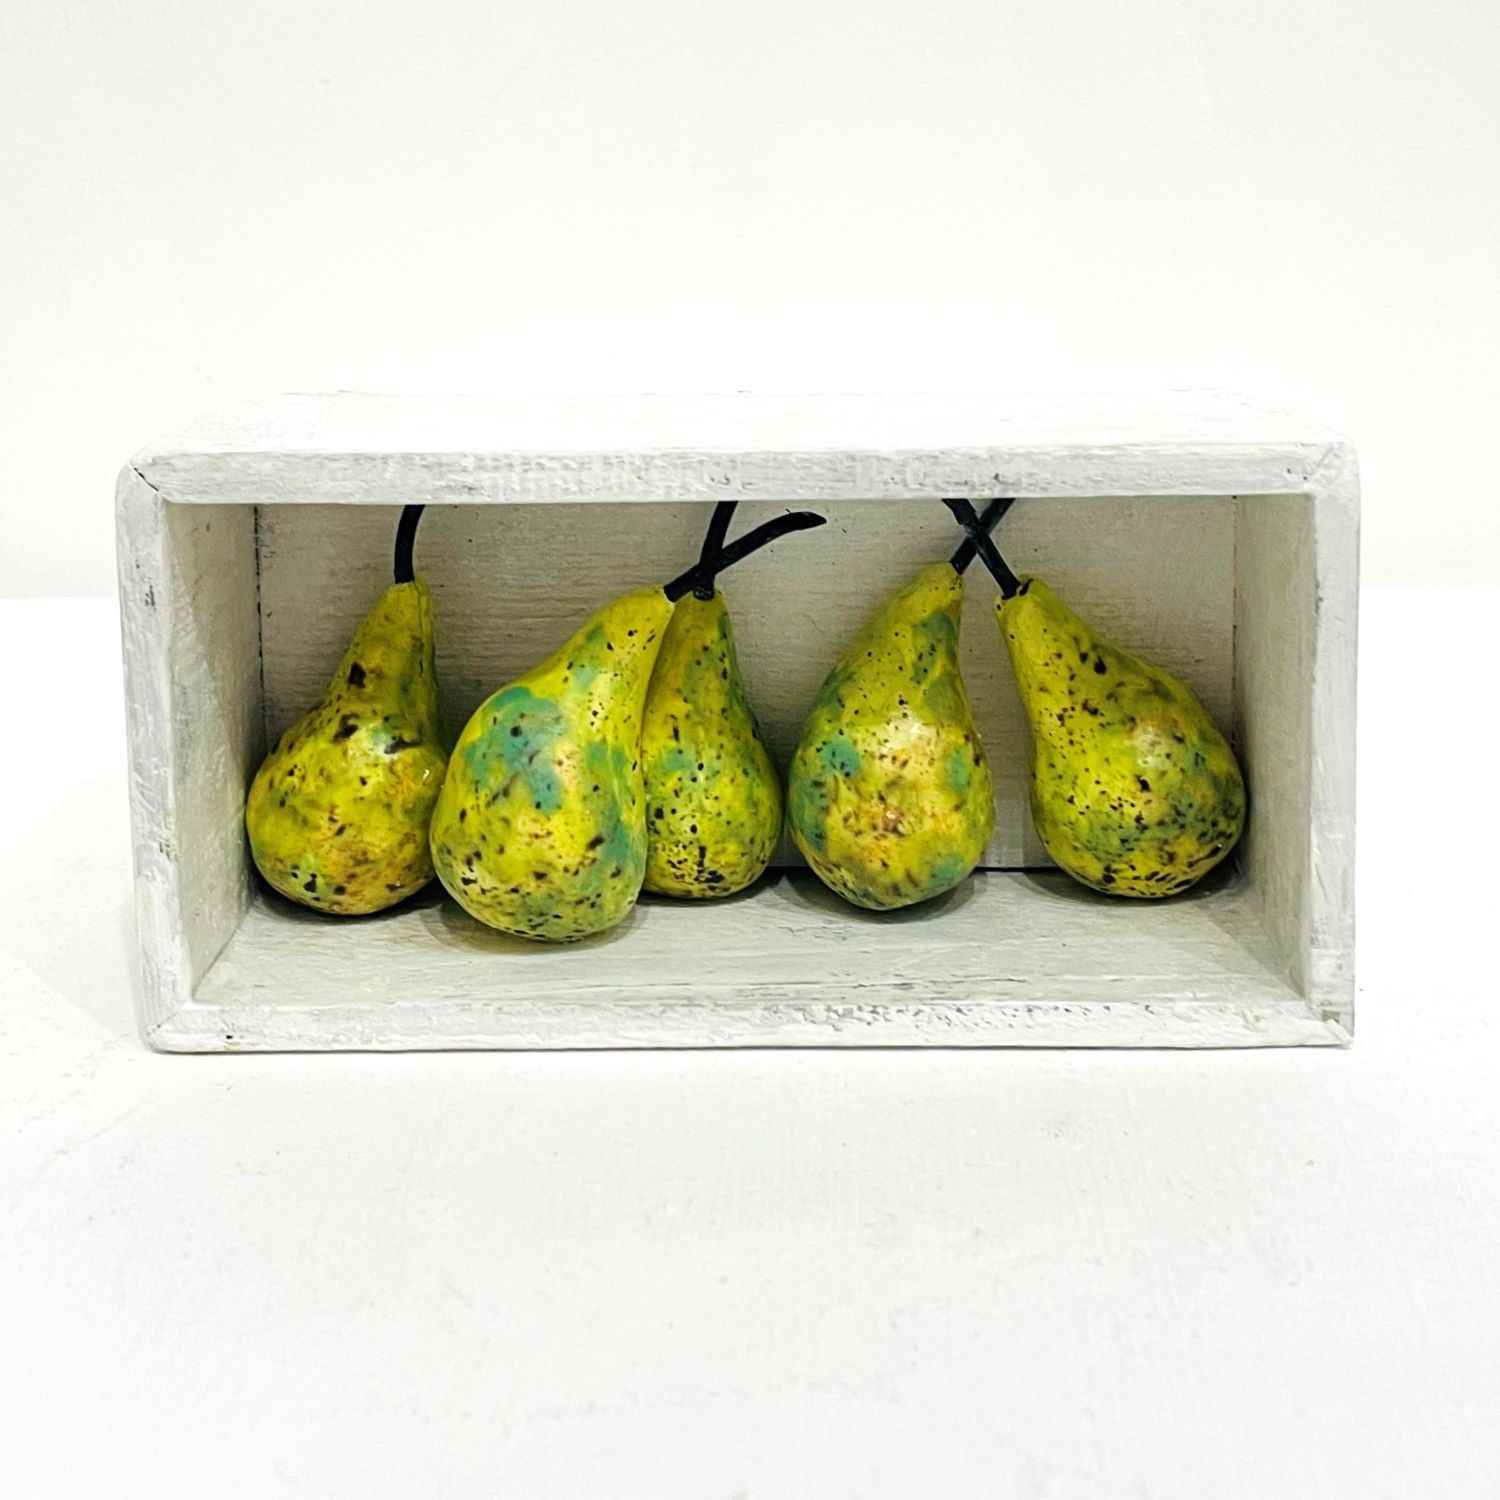 'The Miniature Pantry: Conference Pears' by artist Diana Tonnison